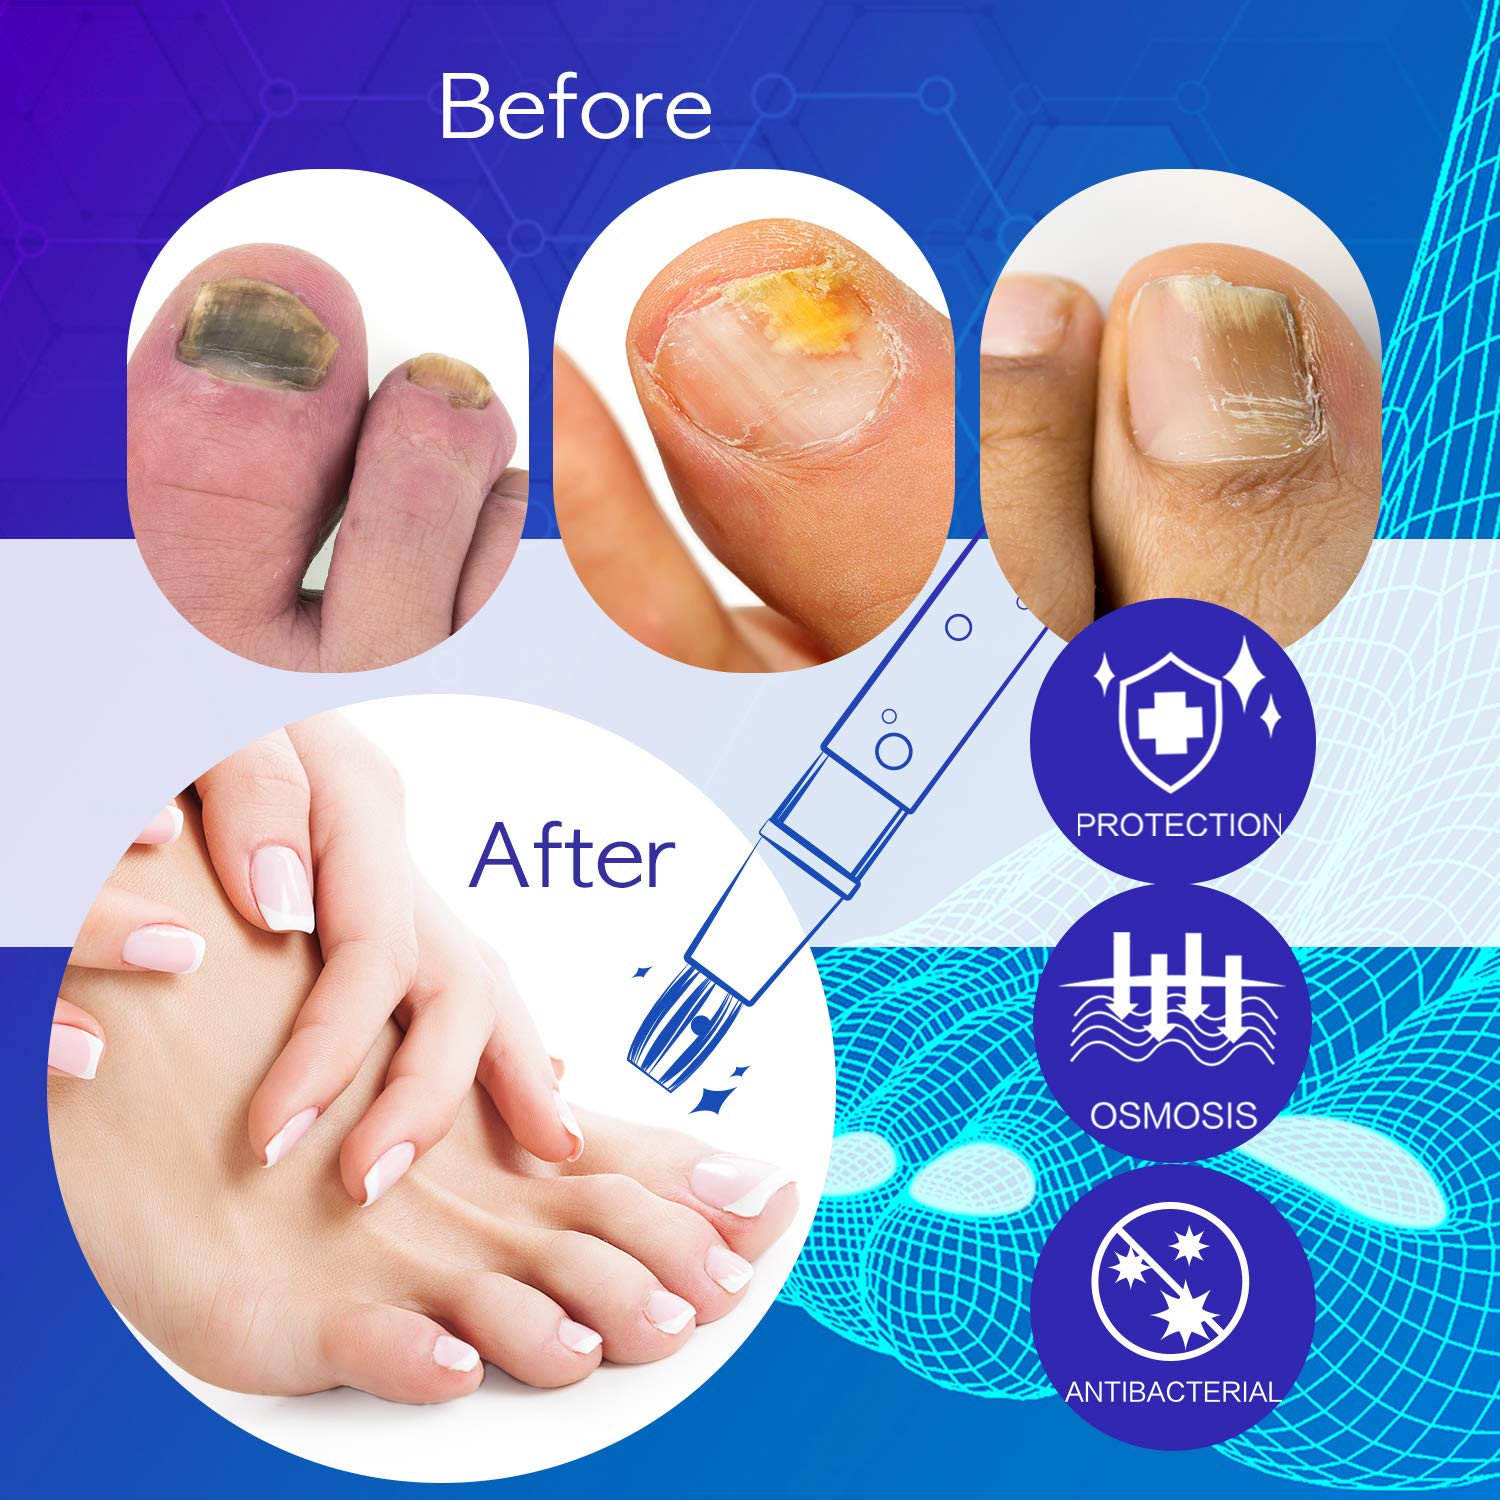 Nail Psoriasis vs. Fungus: Symptoms, Causes, Treatments, and Risks